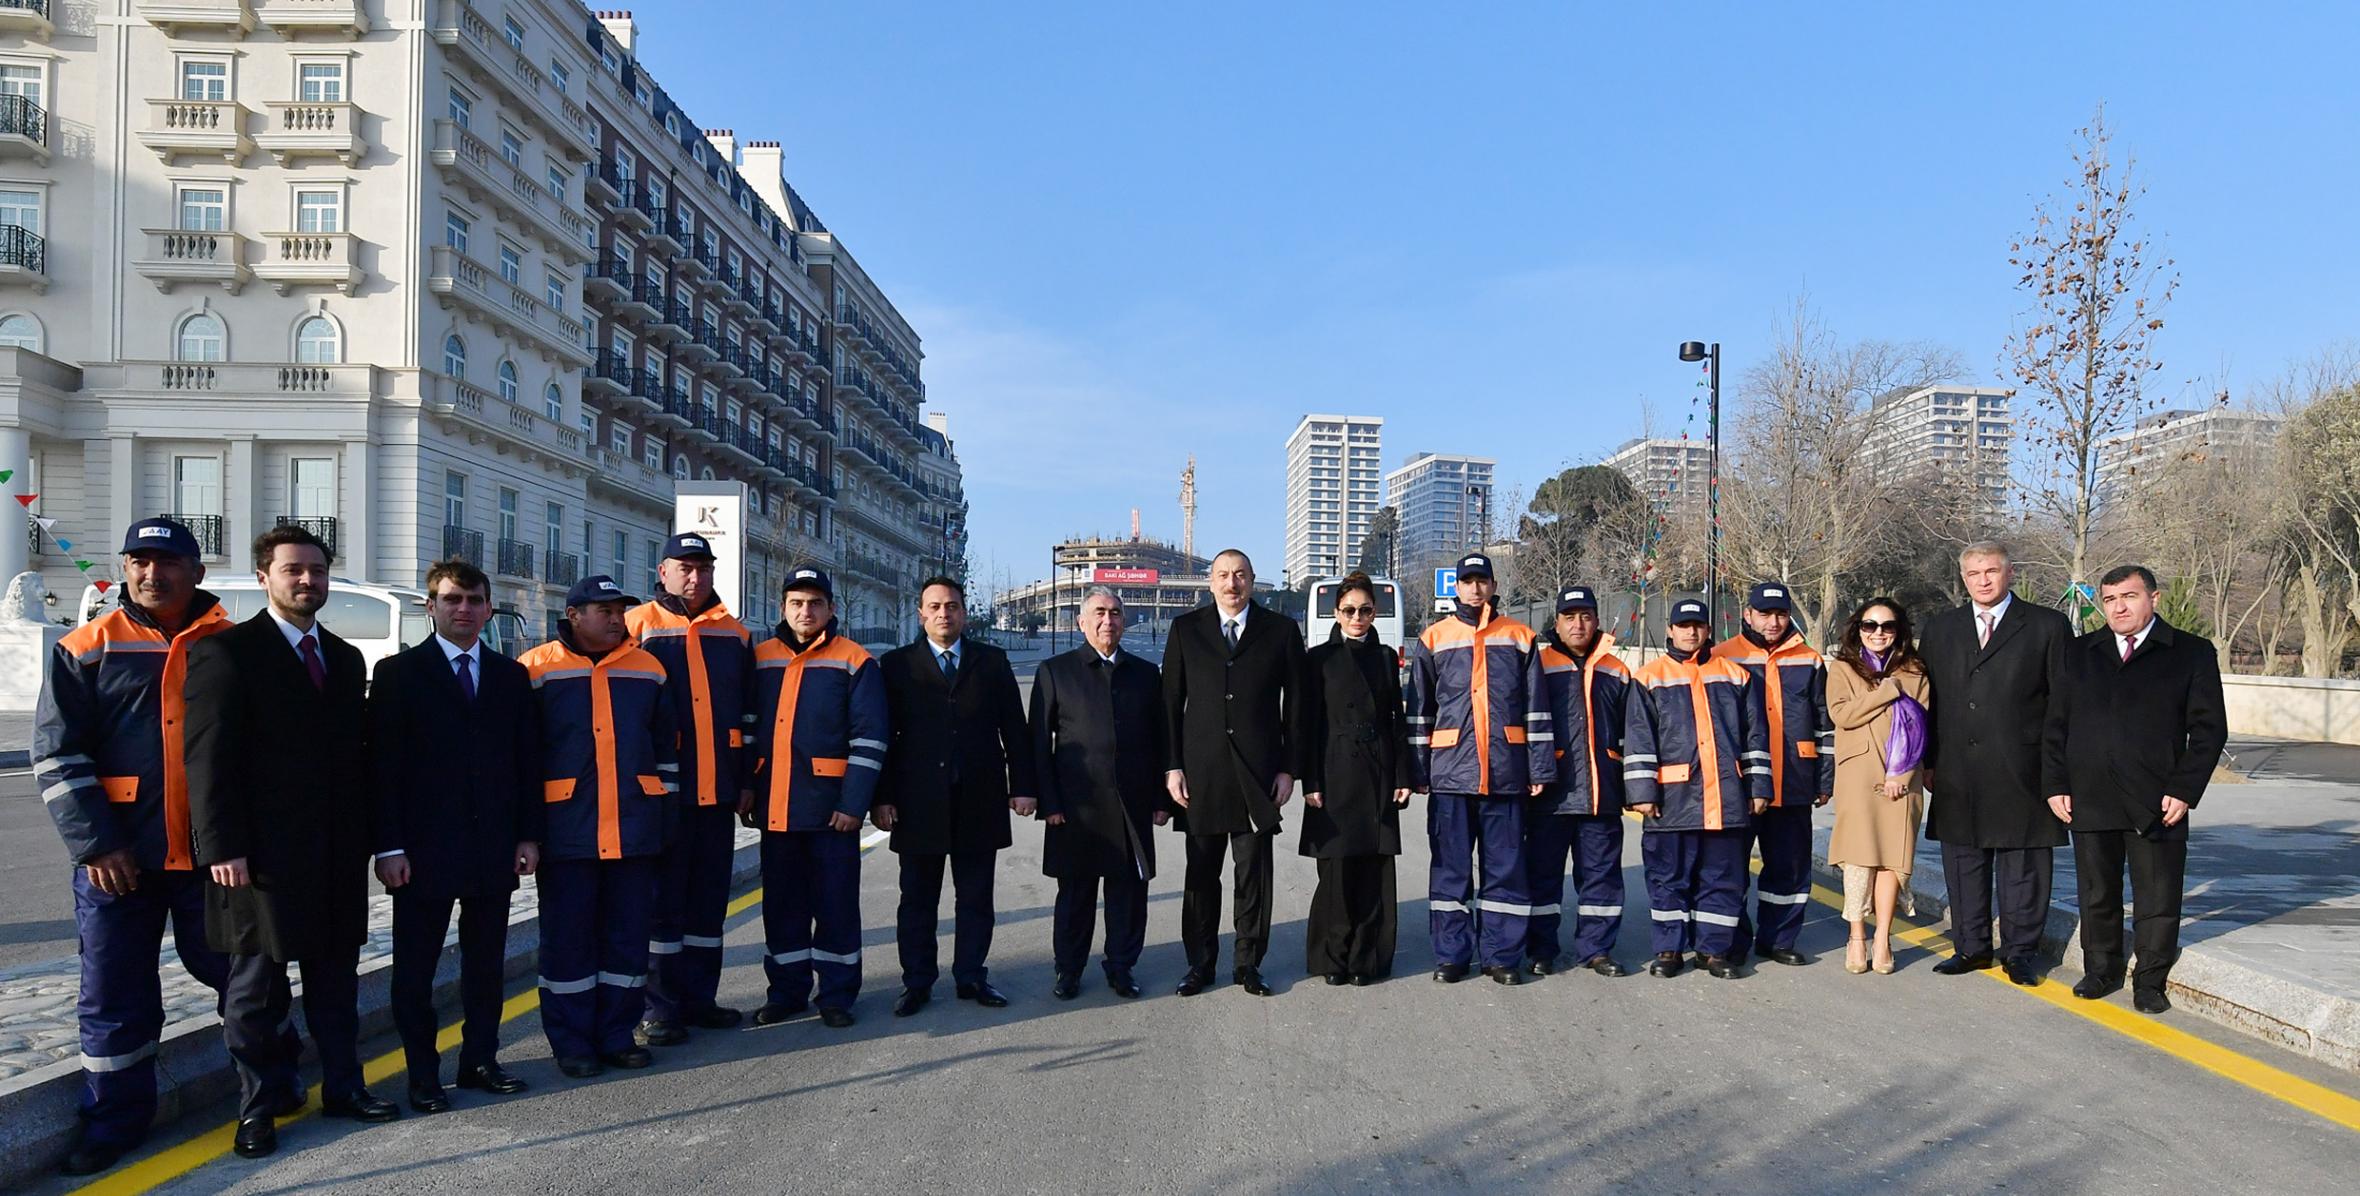 Ilham Aliyev attended opening of Central Boulevard Street in Baku White City